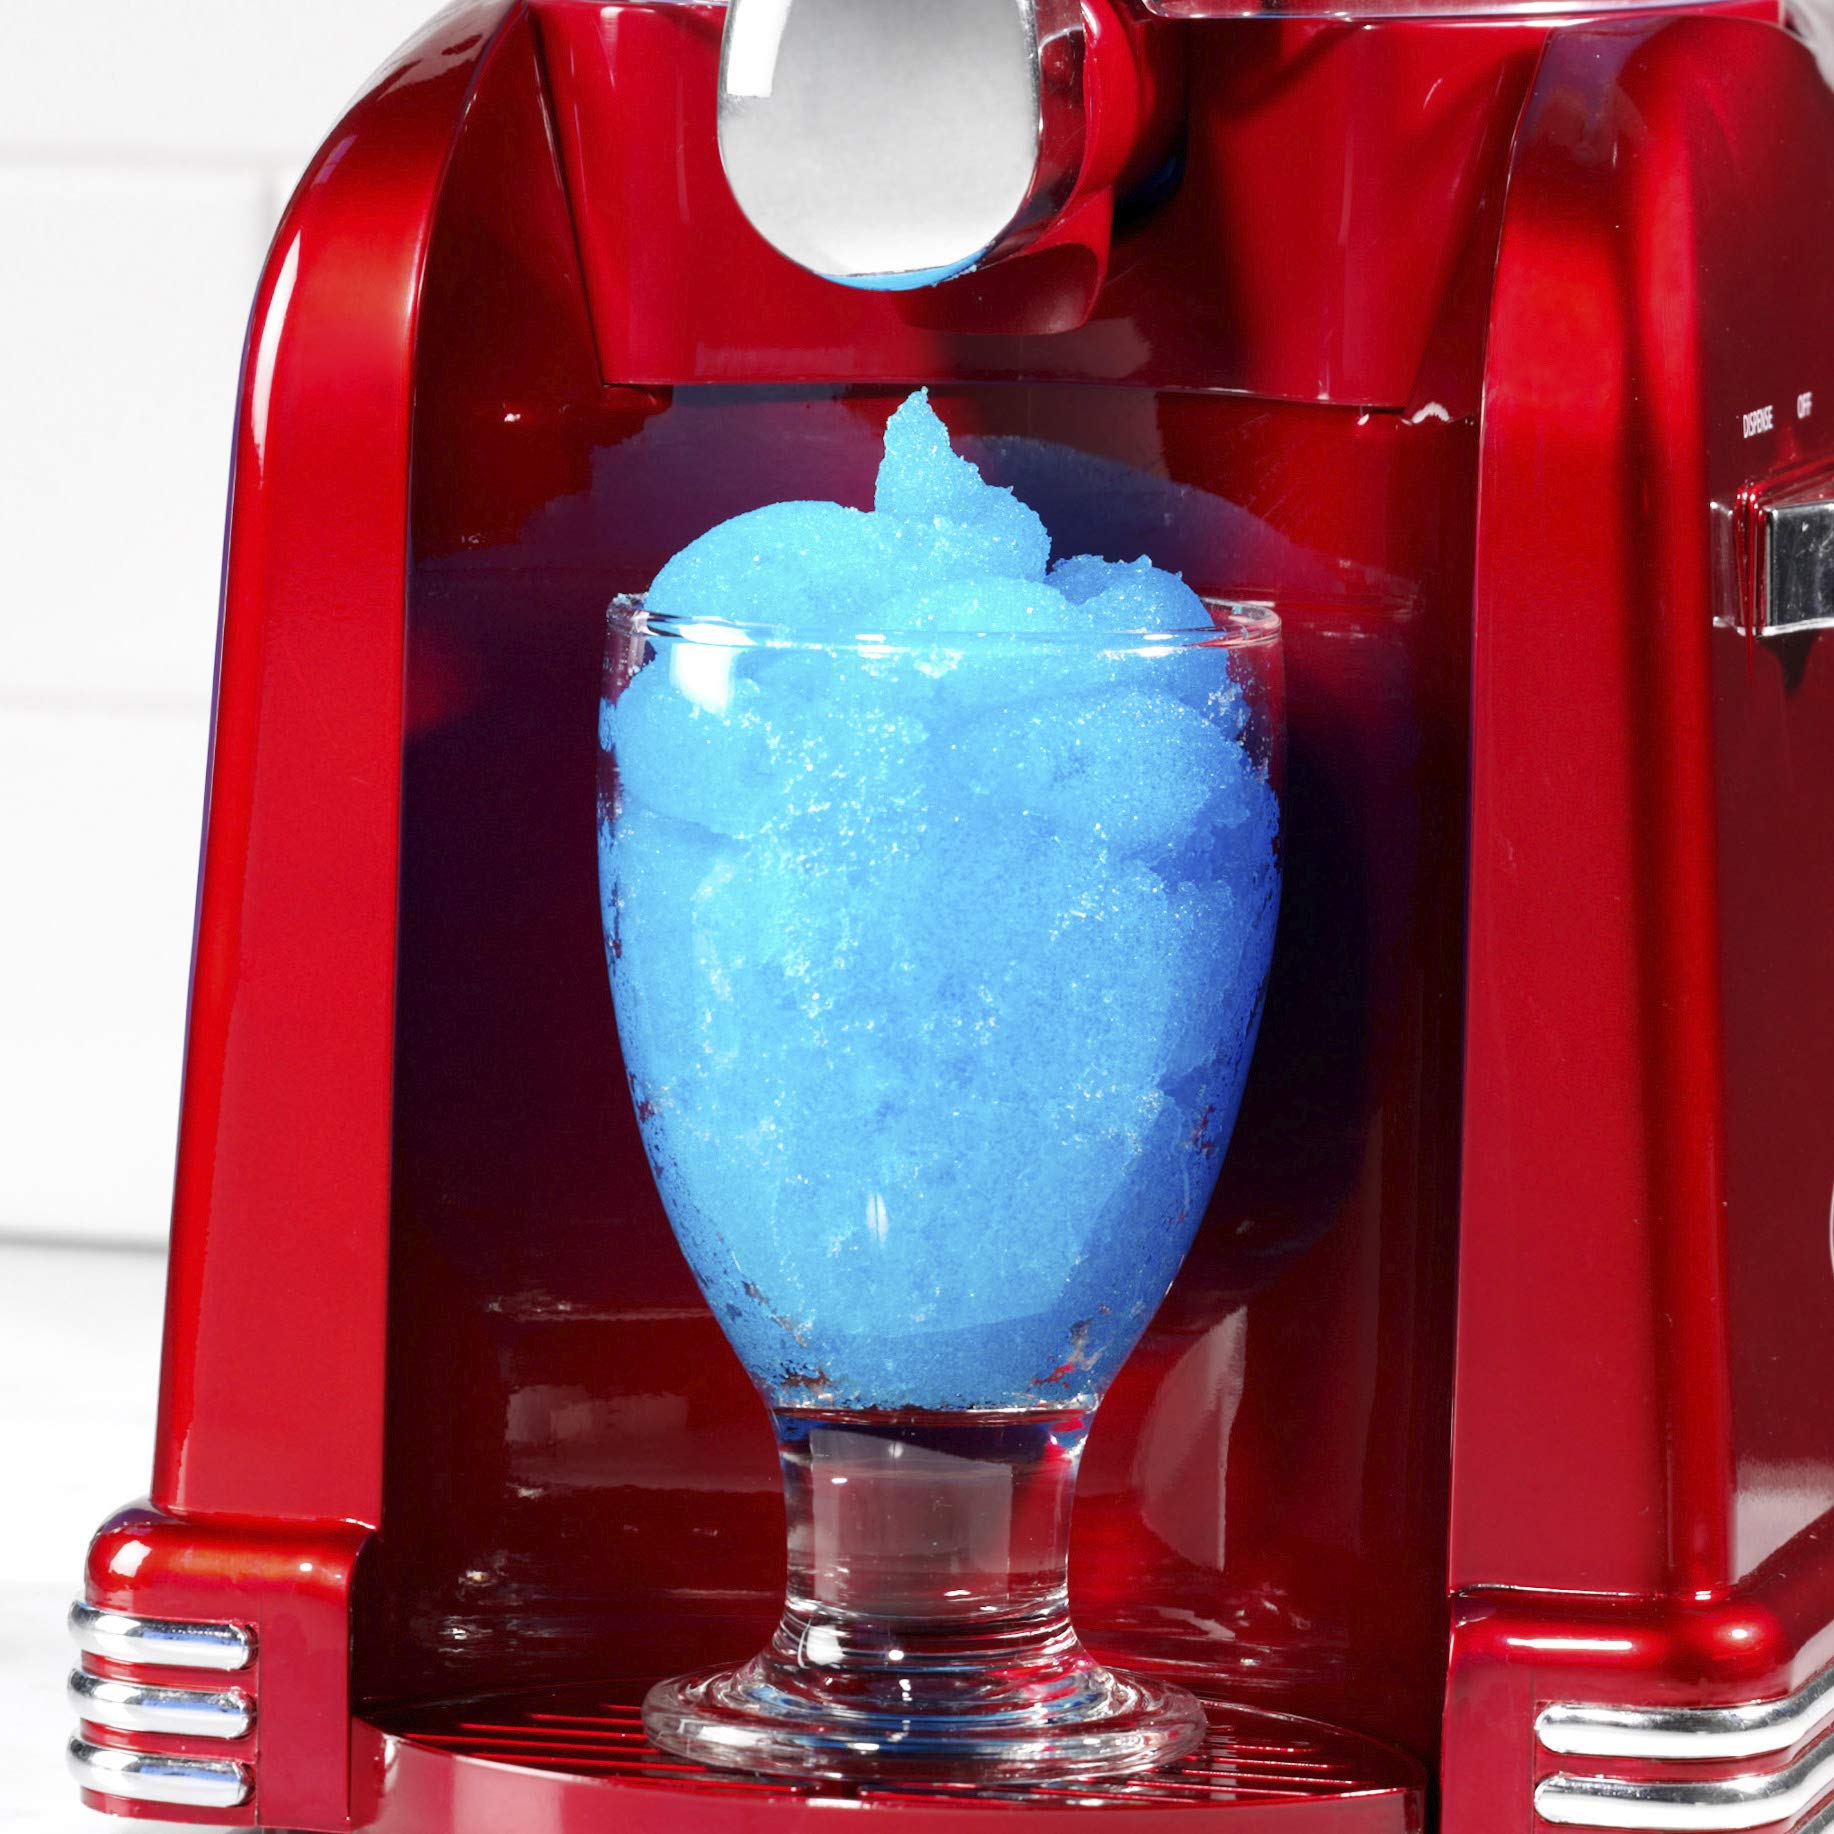 Nostalgia Frozen Drink Maker and Margarita Machine for Home - 32-Ounce Slushy Maker with Stainless Steel Flow Spout - Easy to Clean and Double Insulated - Retro Red